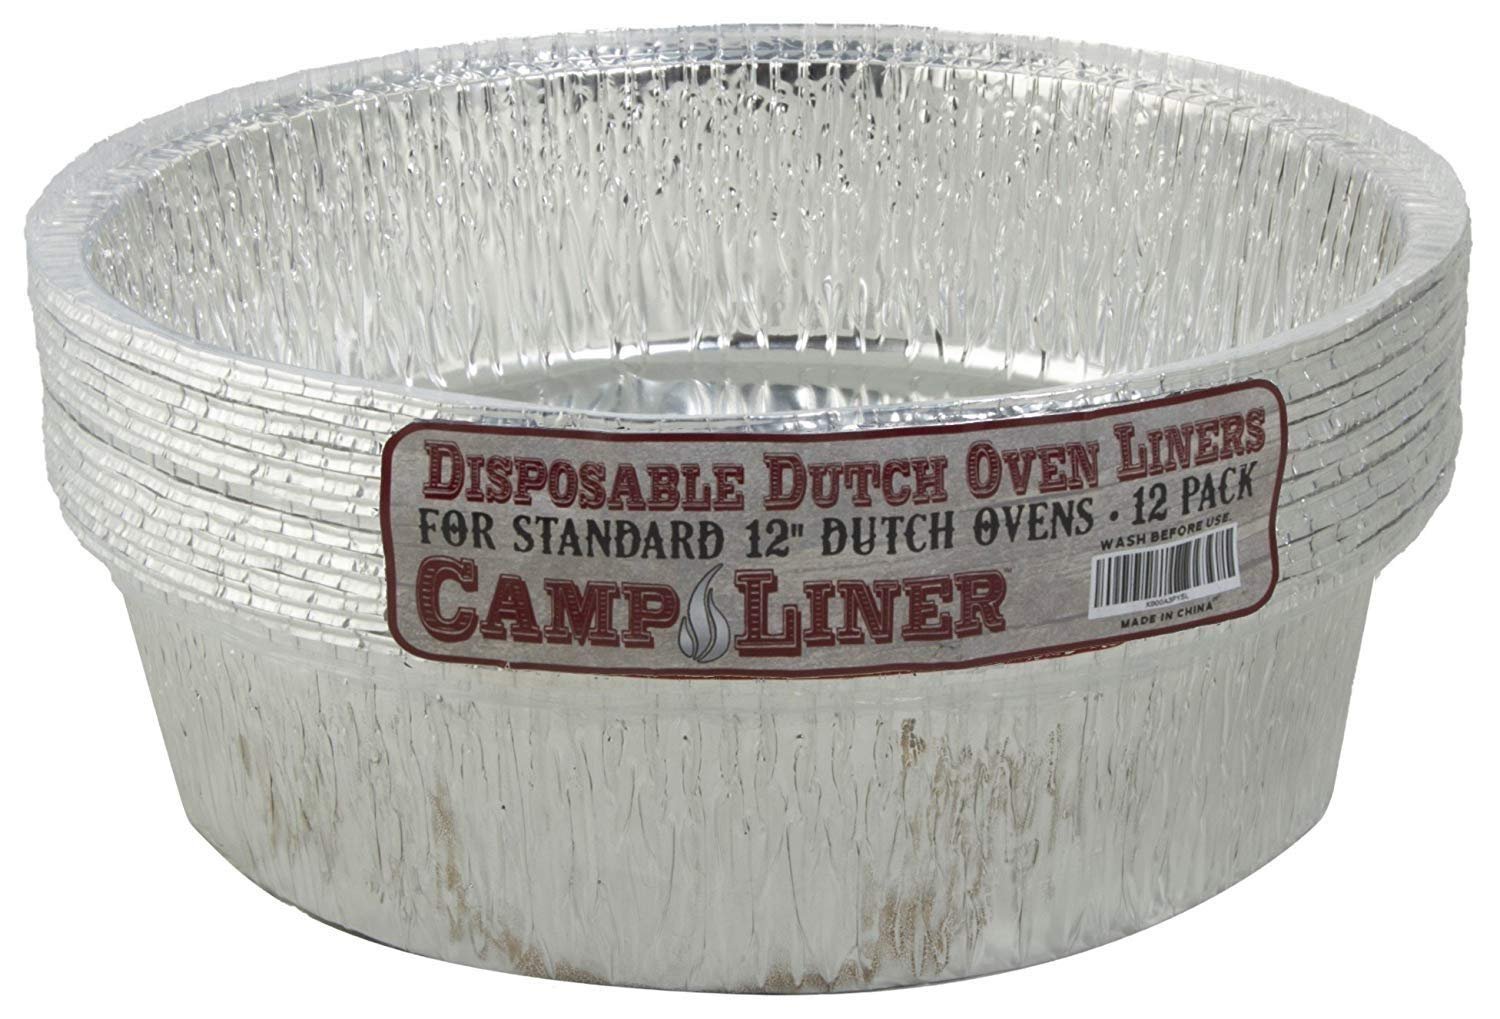 Book Cover CampLiner Dutch Oven Liners, 12 Pack of 12” 6 Quart Disposable Liners - No More Cleaning or Seasoning. Fits Lodge, Camp Chef, And Other 12-Inch Cast Iron Dutch Ovens